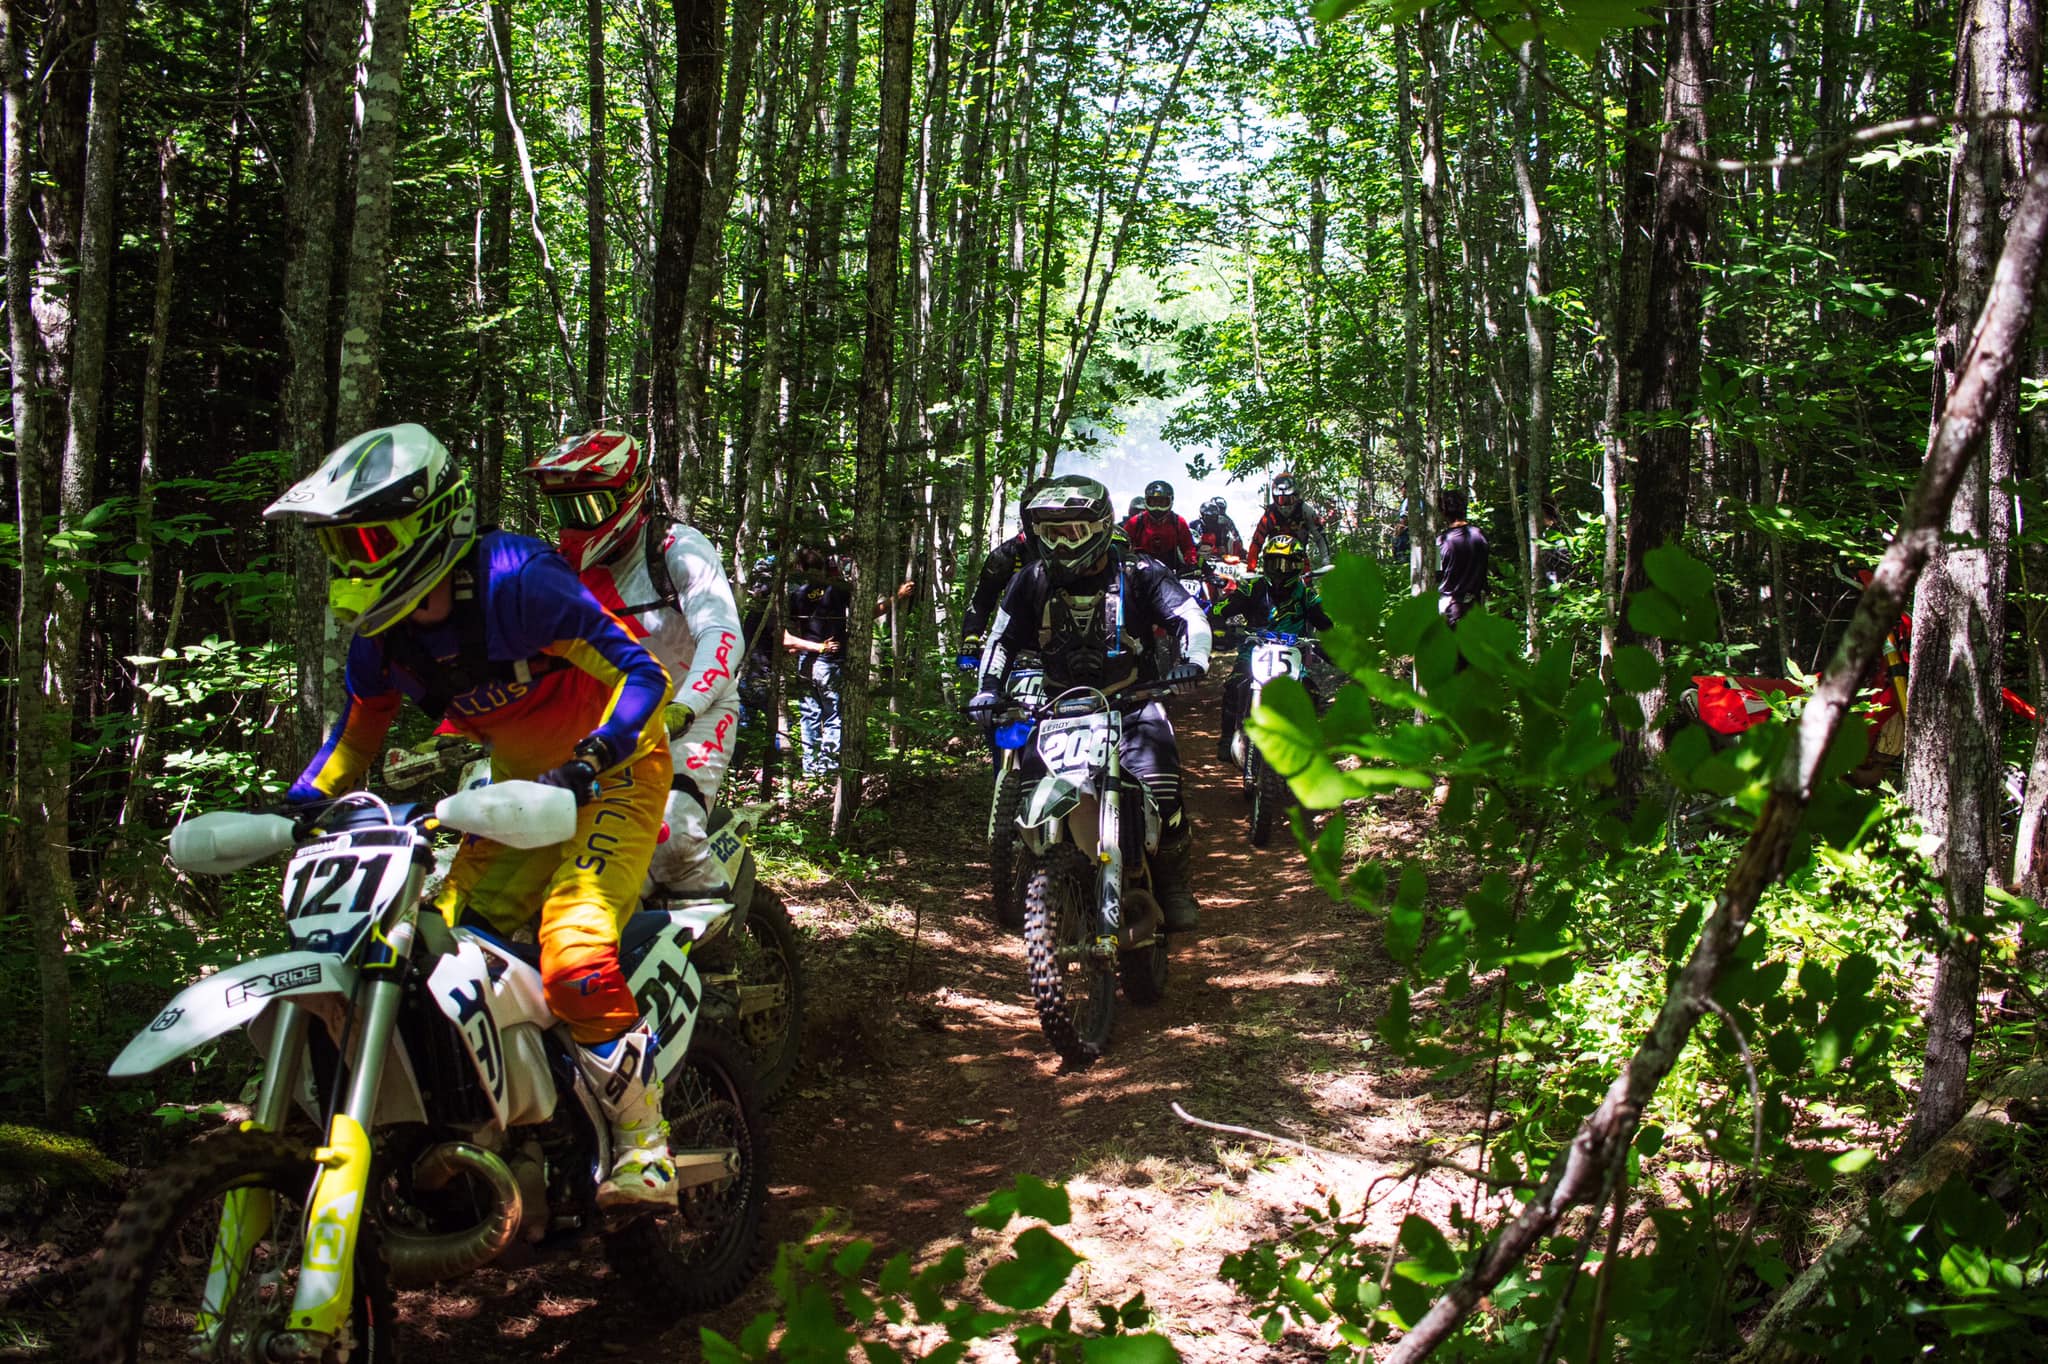 Riders racing through the woods at South Alton